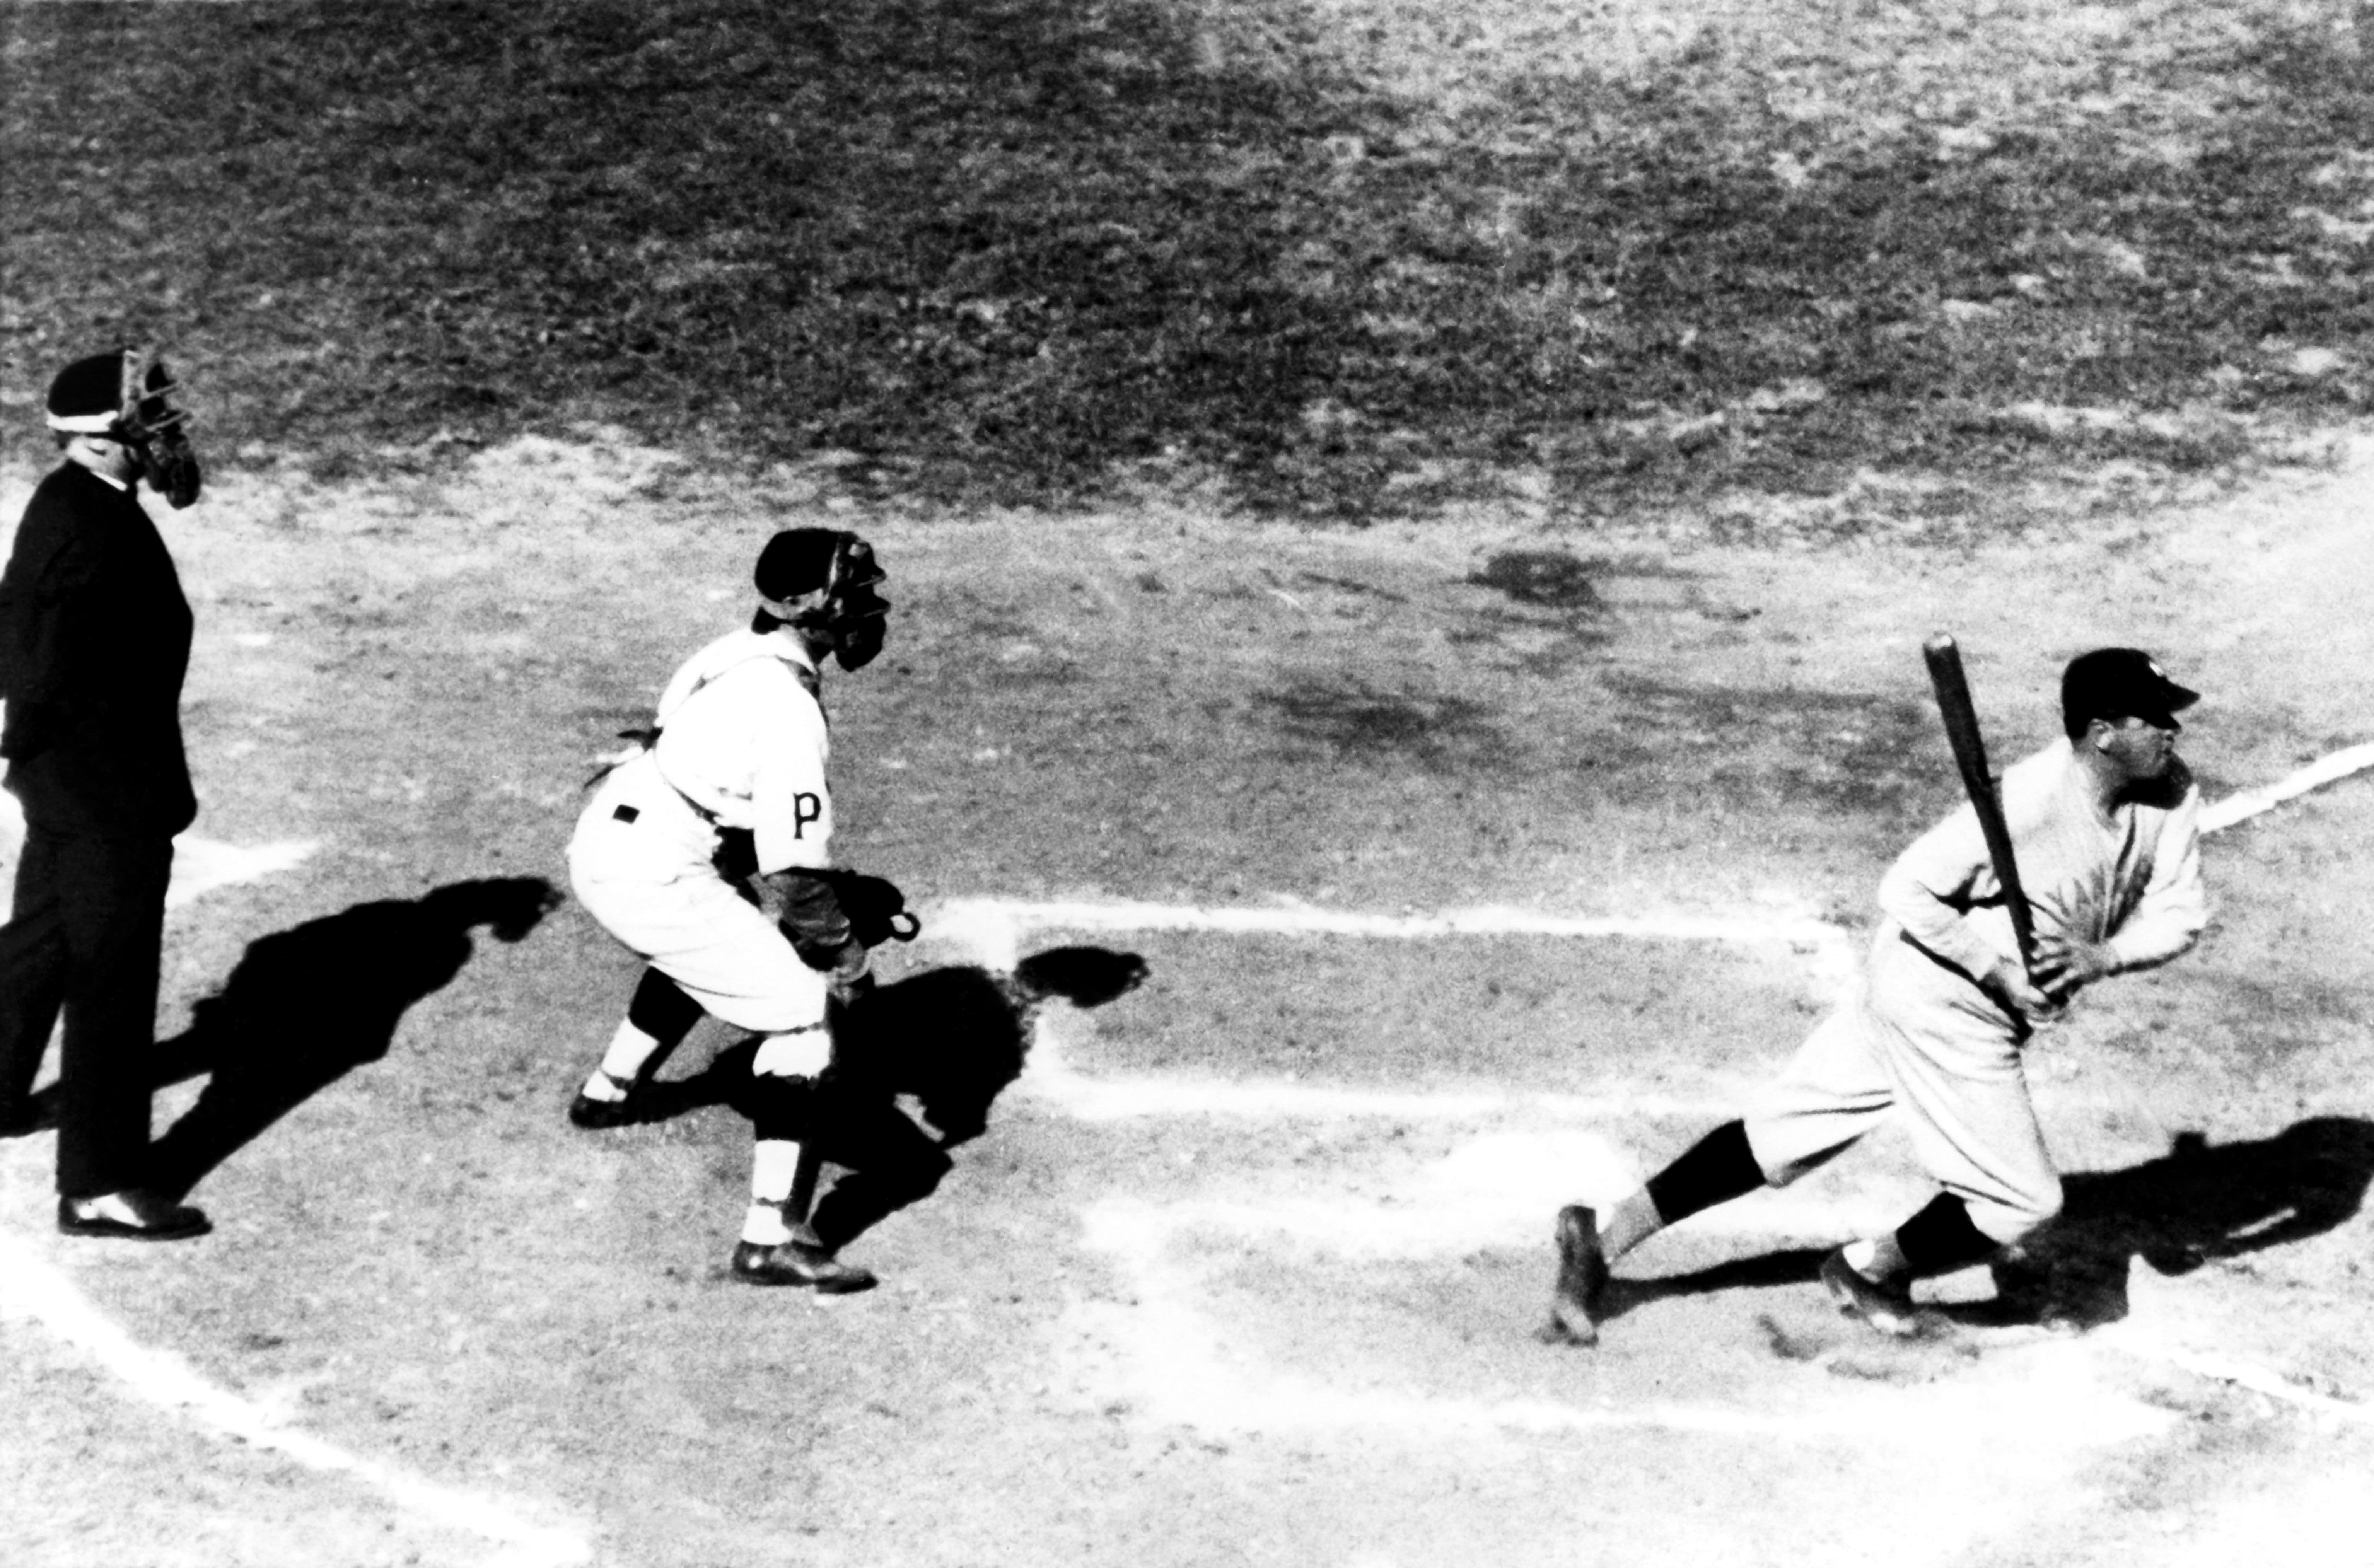 On this day in history, September 30, 1927, Babe Ruth swats record ...